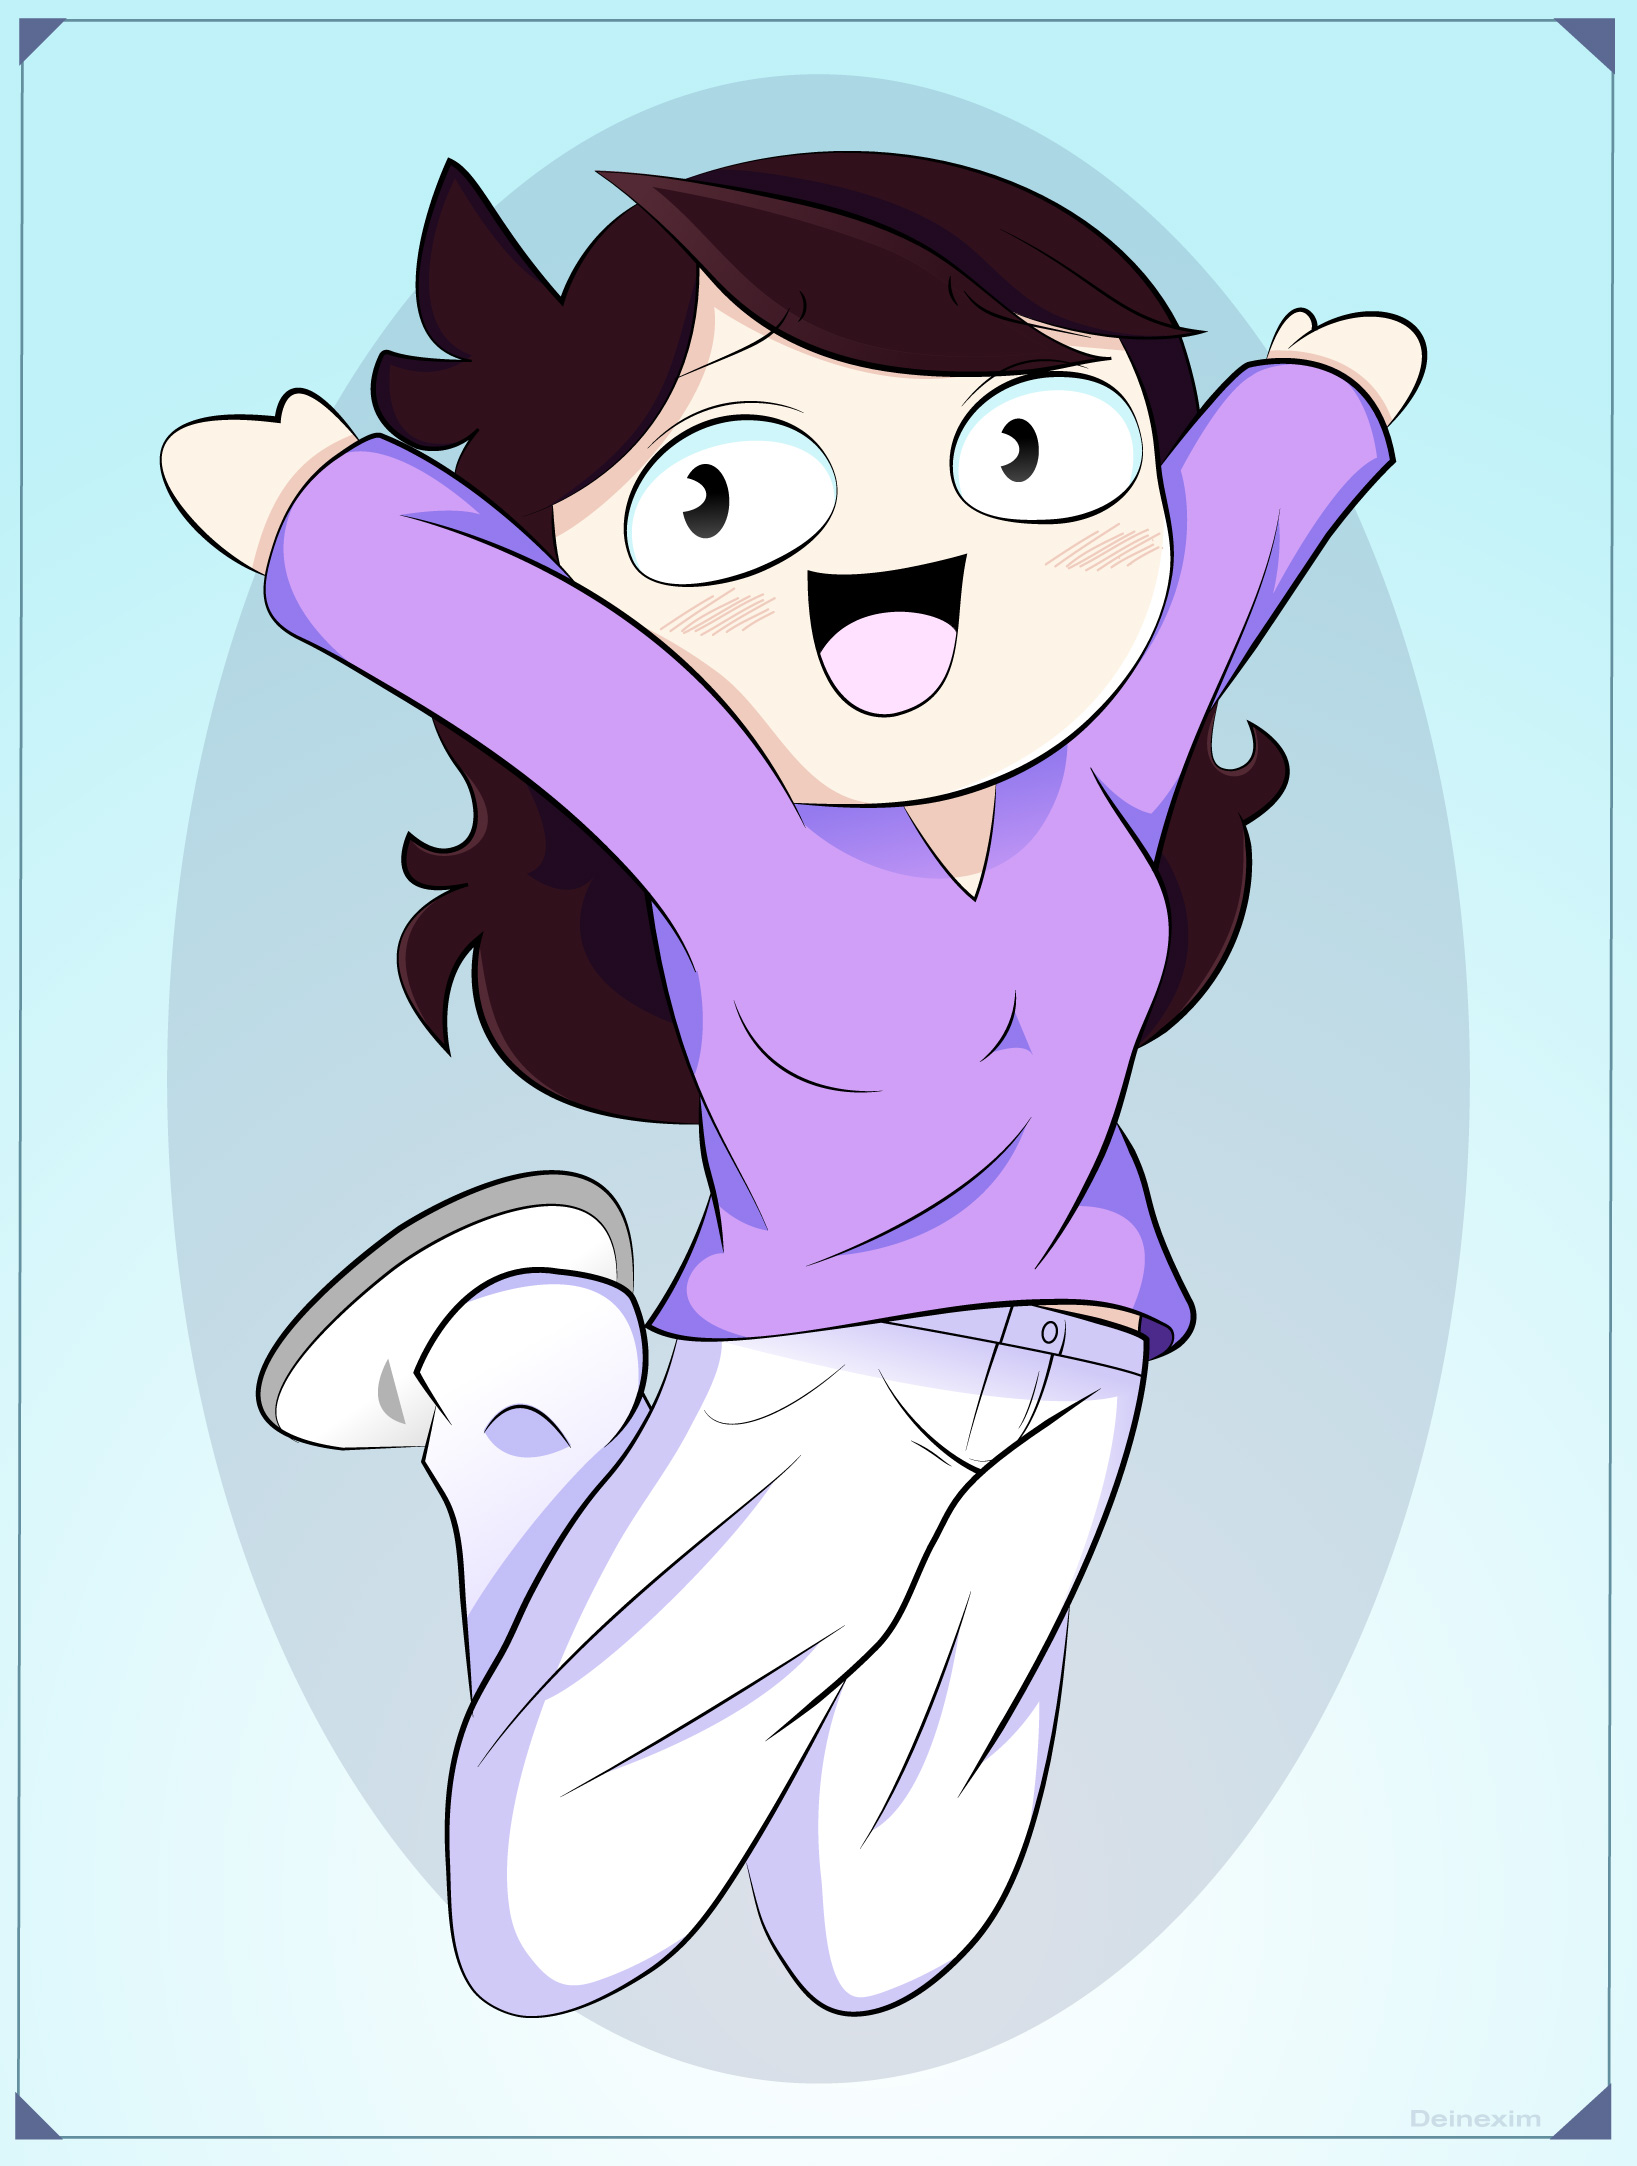 JaidenAnimations's Profile Picture  Jaiden animations, Animation, Animated  drawings